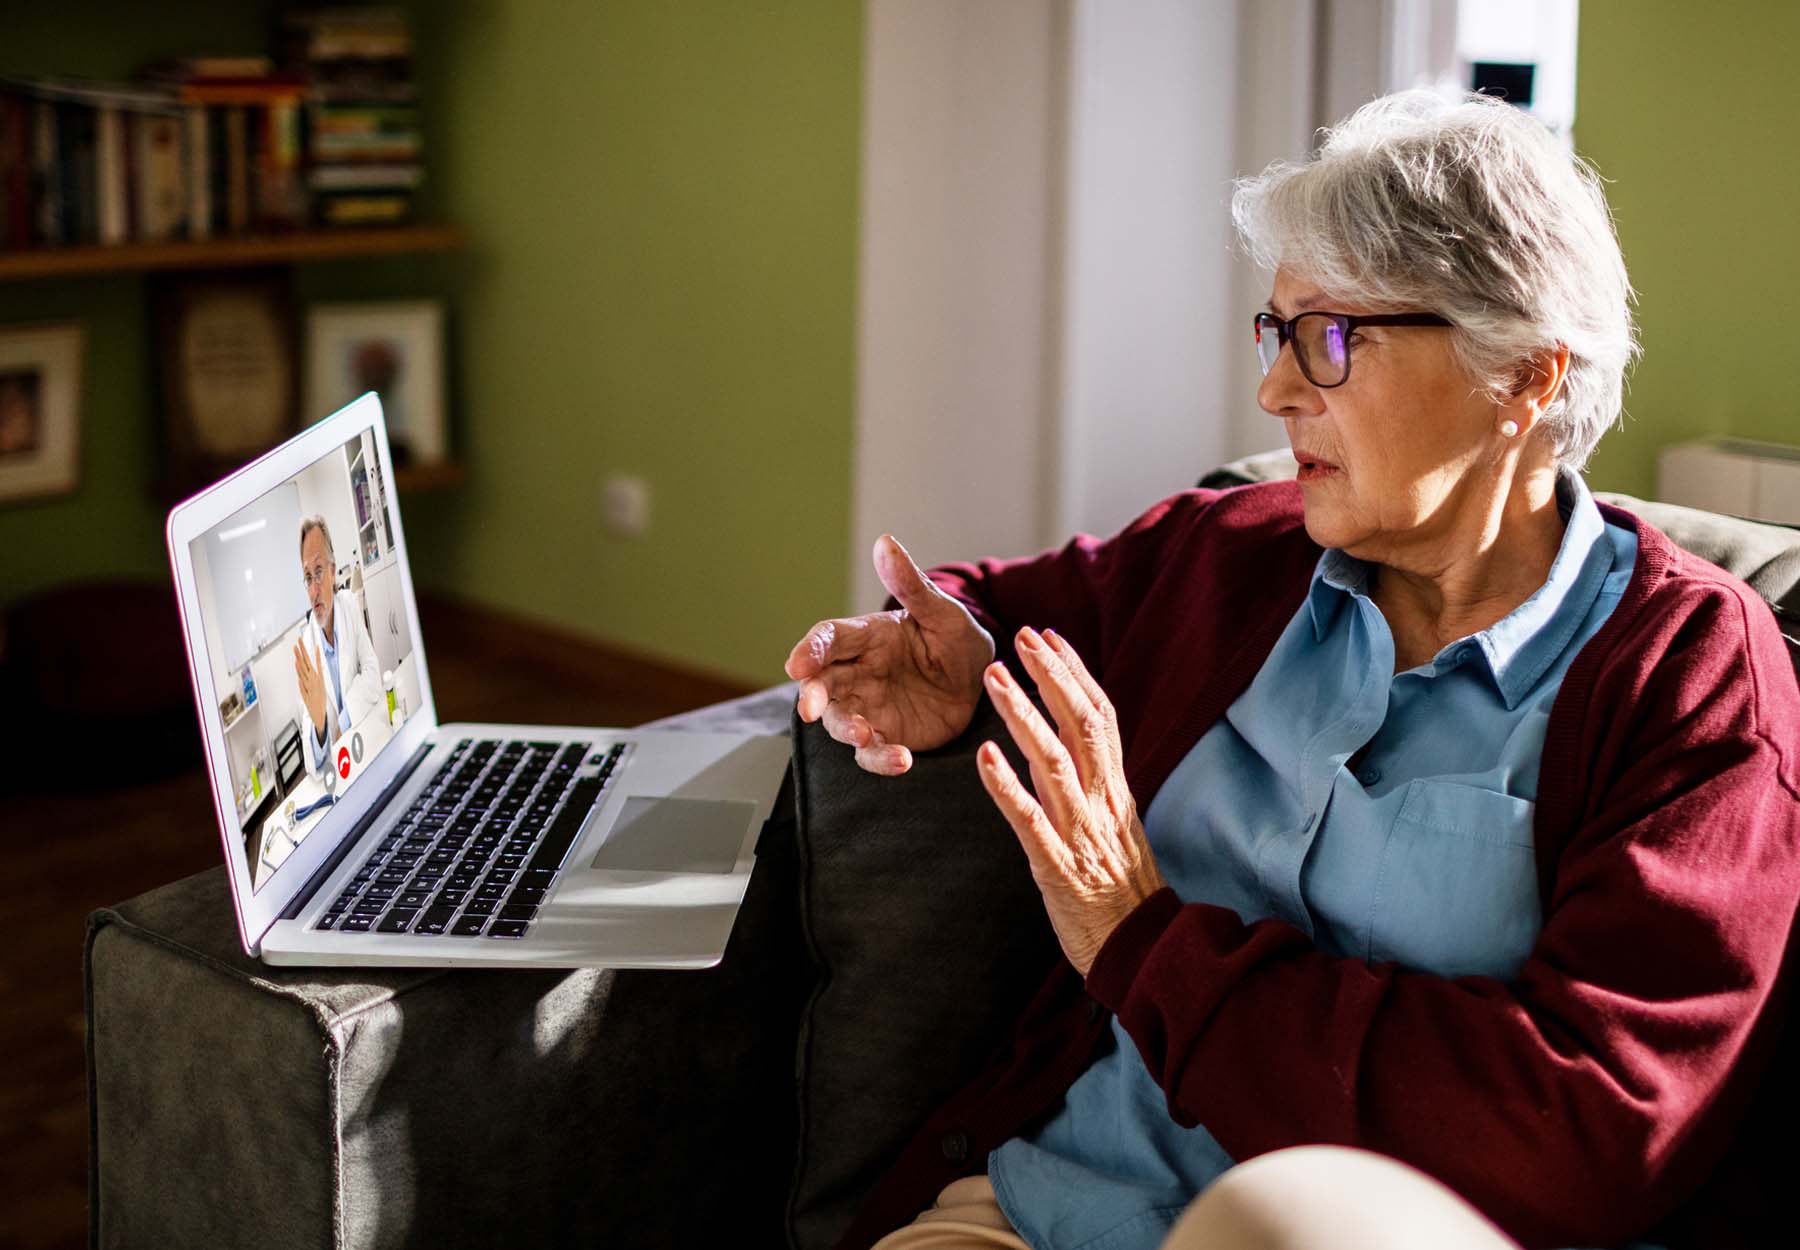 An elderly woman meets with her doctor via video conferencing on her laptop.